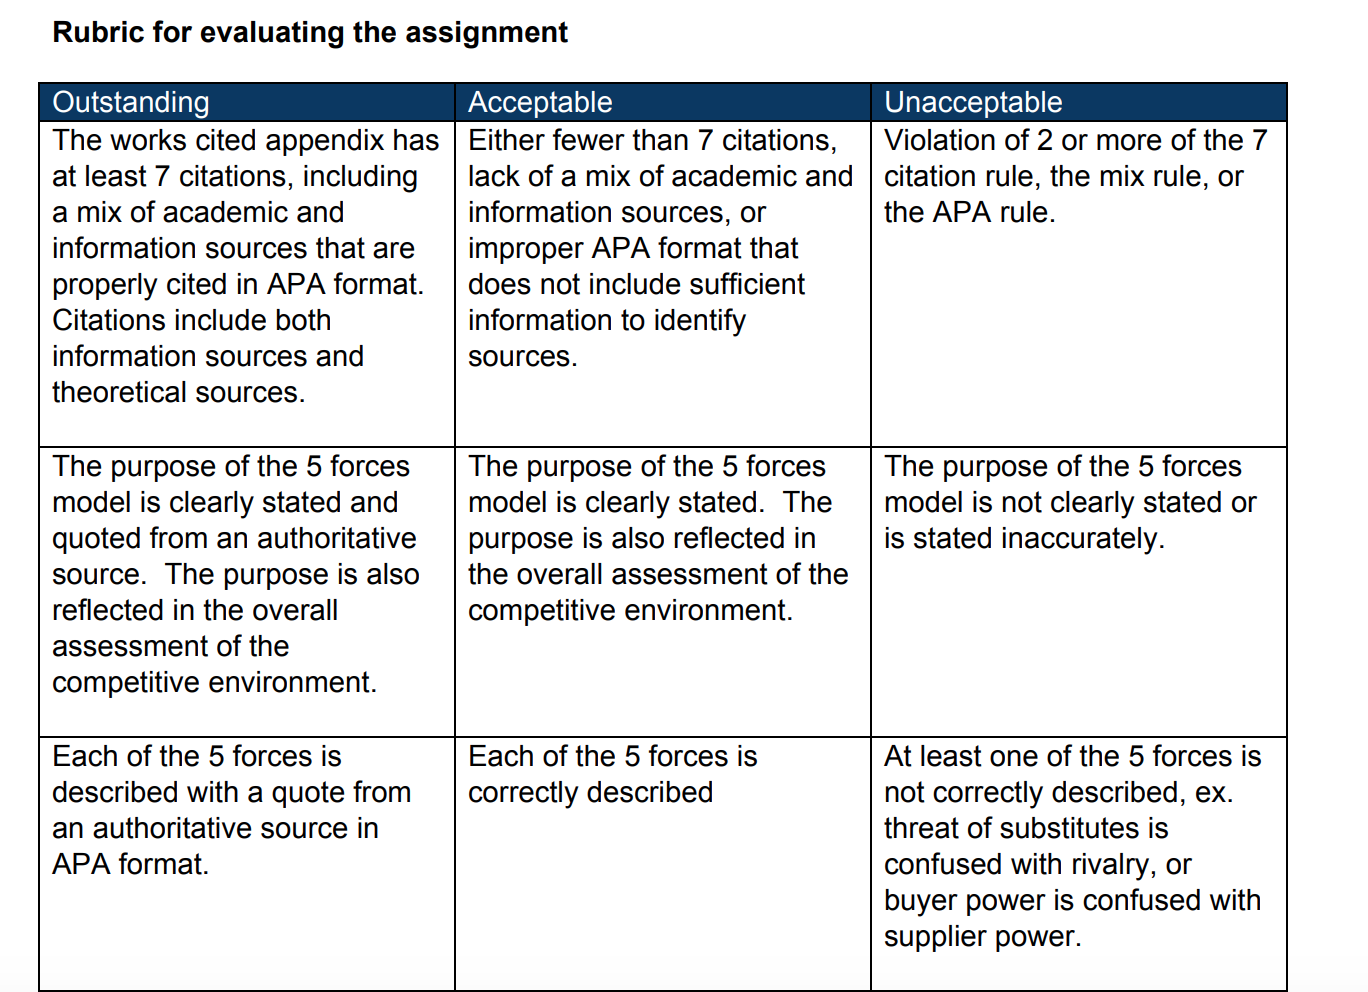 Rubric for evaluating the assignment Unacceptable Violation of 2 or more of the 7 citation rule, the mix rule, or the APA rul